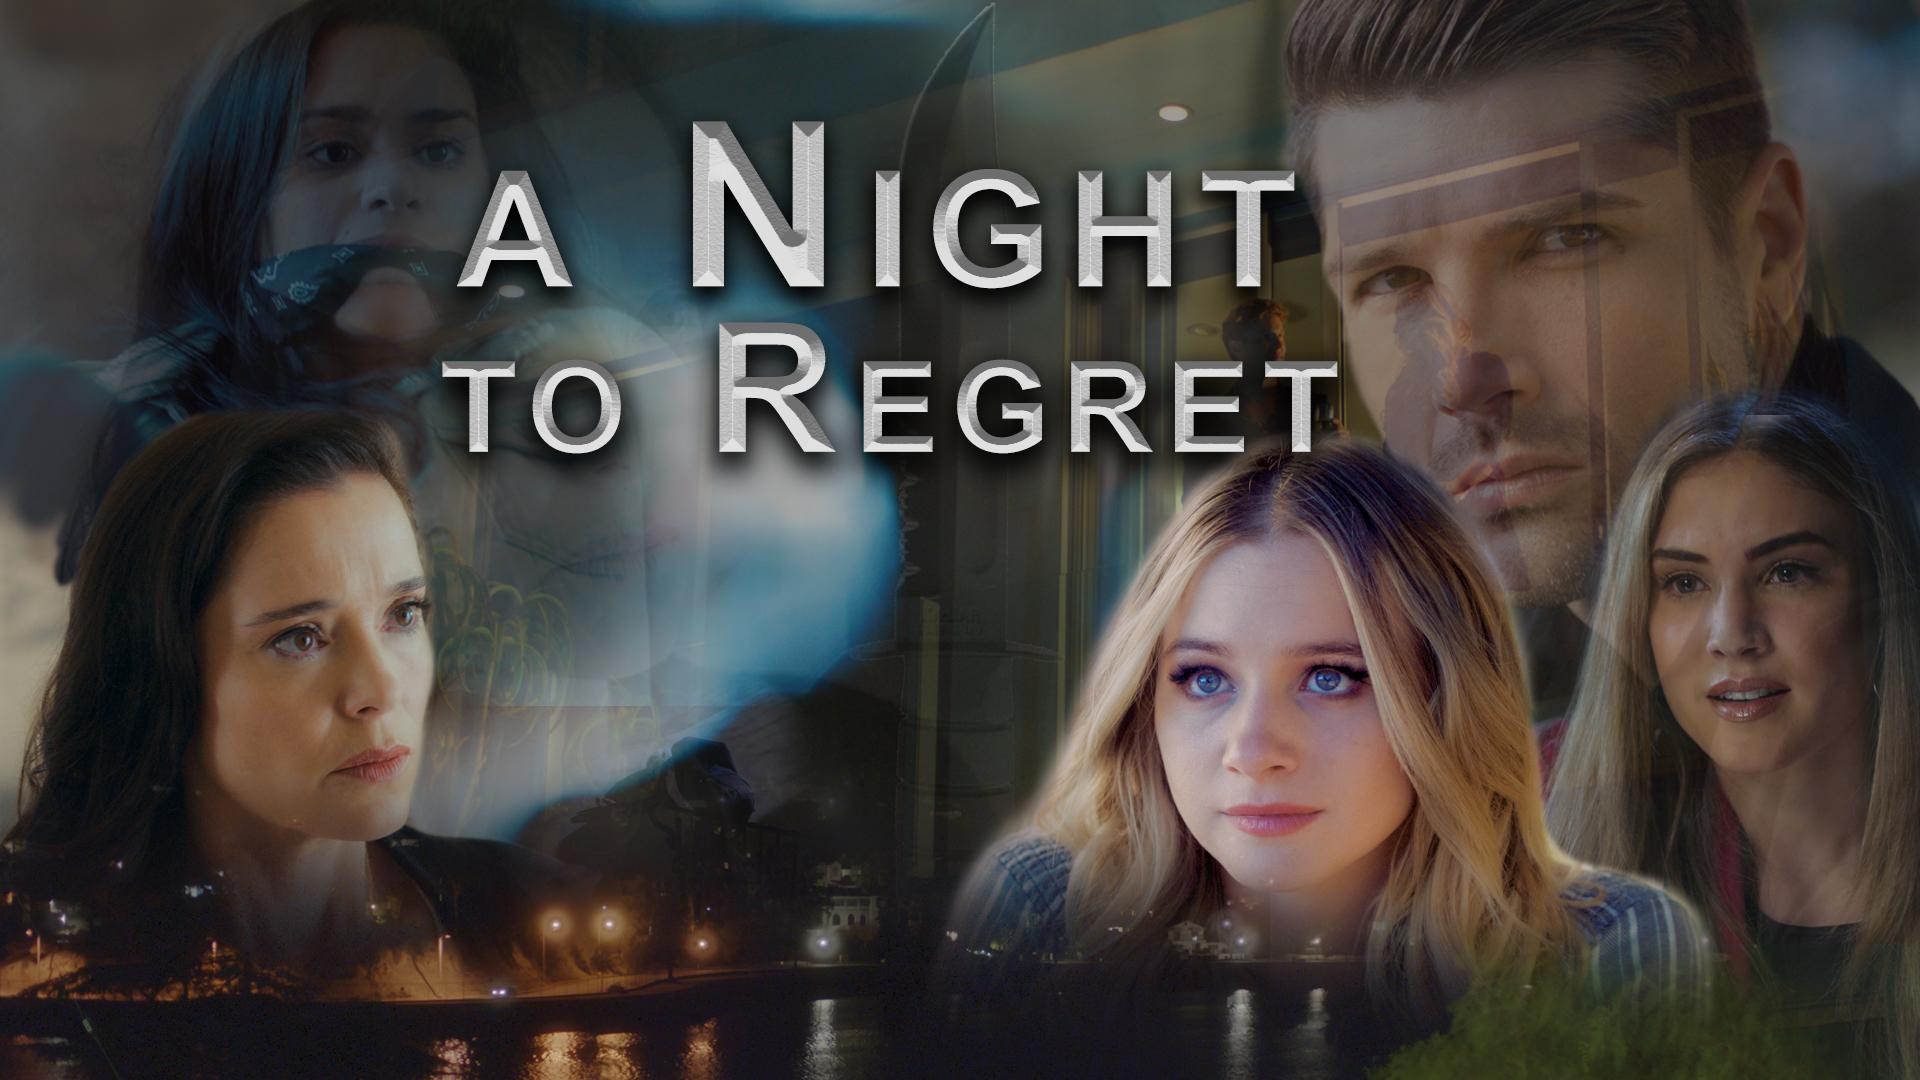 A Night to Regret